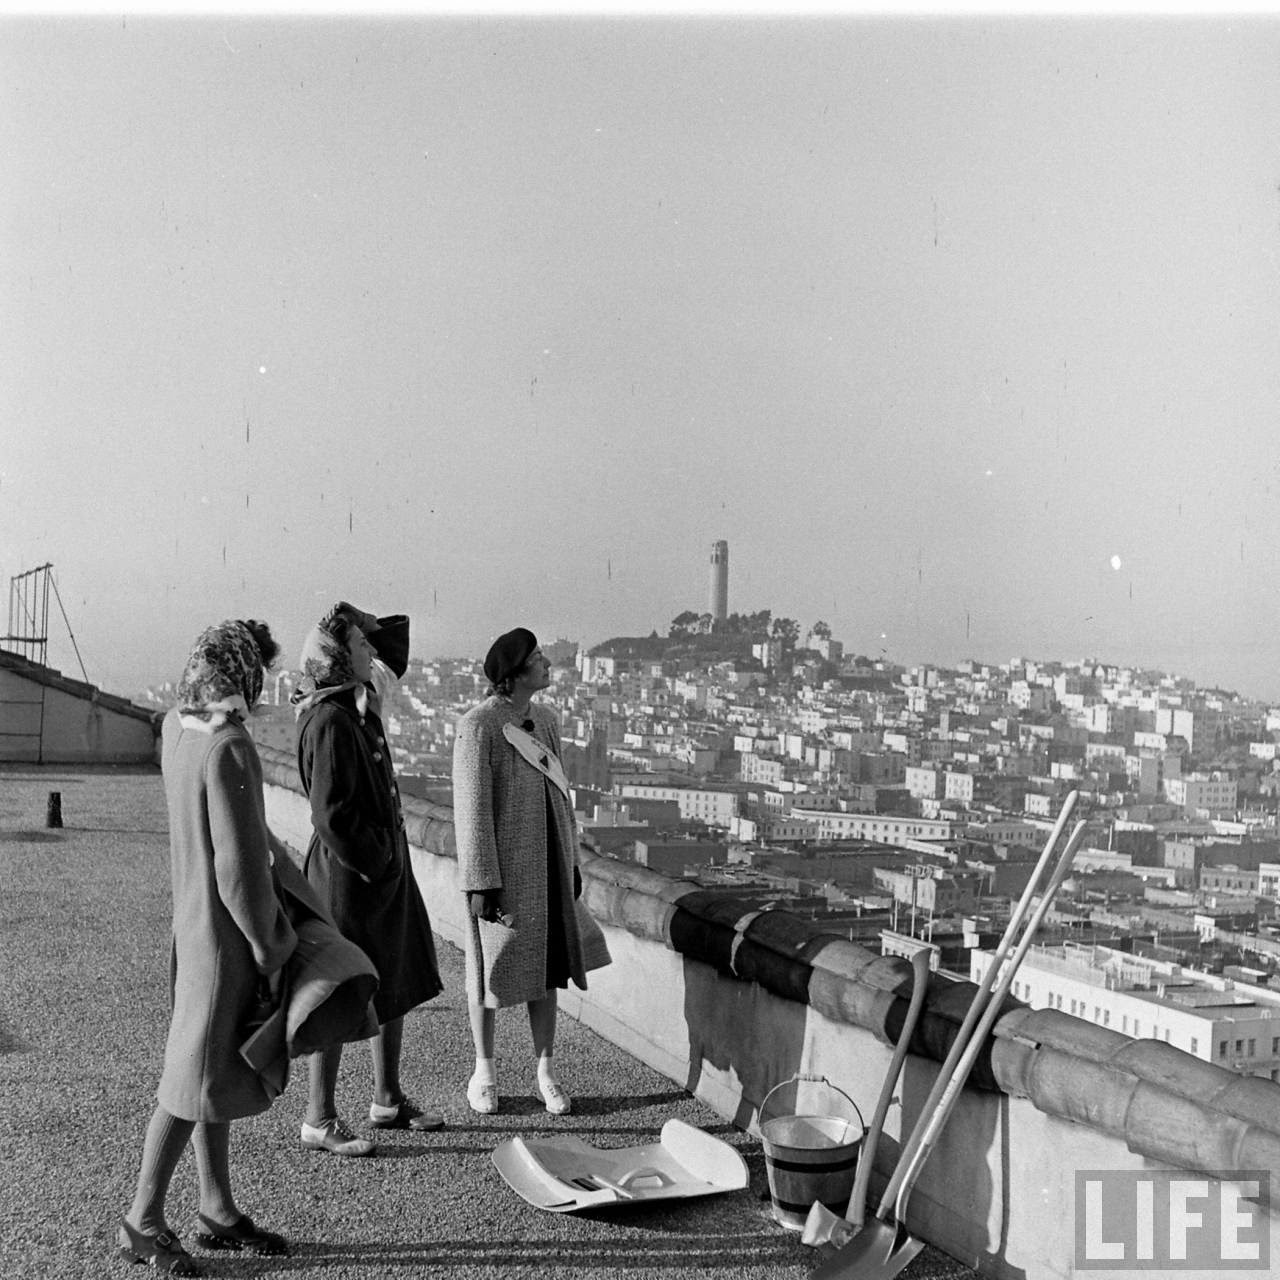 Interesting Black and White Photos Capture Daily Life in San Francisco, 1943 ~ vintage ...